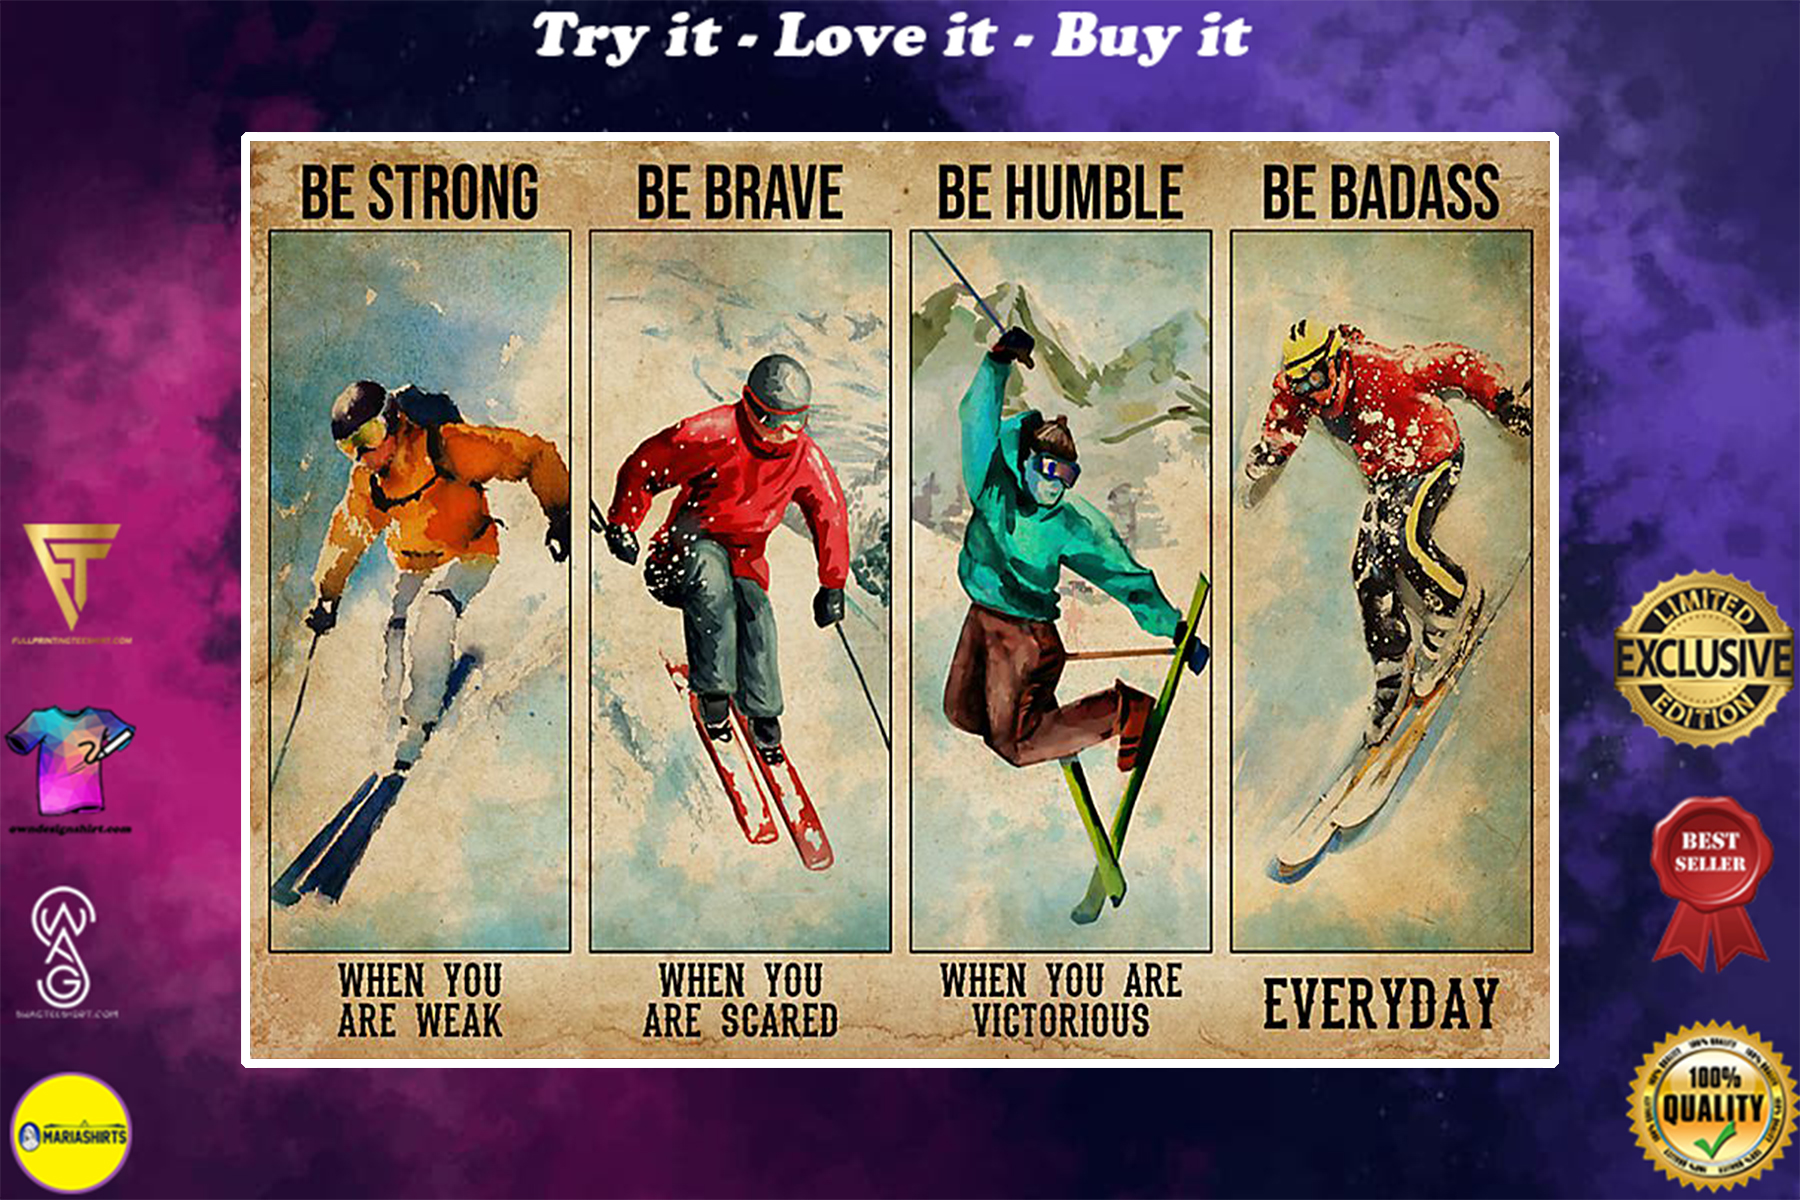 skiing be strong when you are weak be brave when you are scared poster